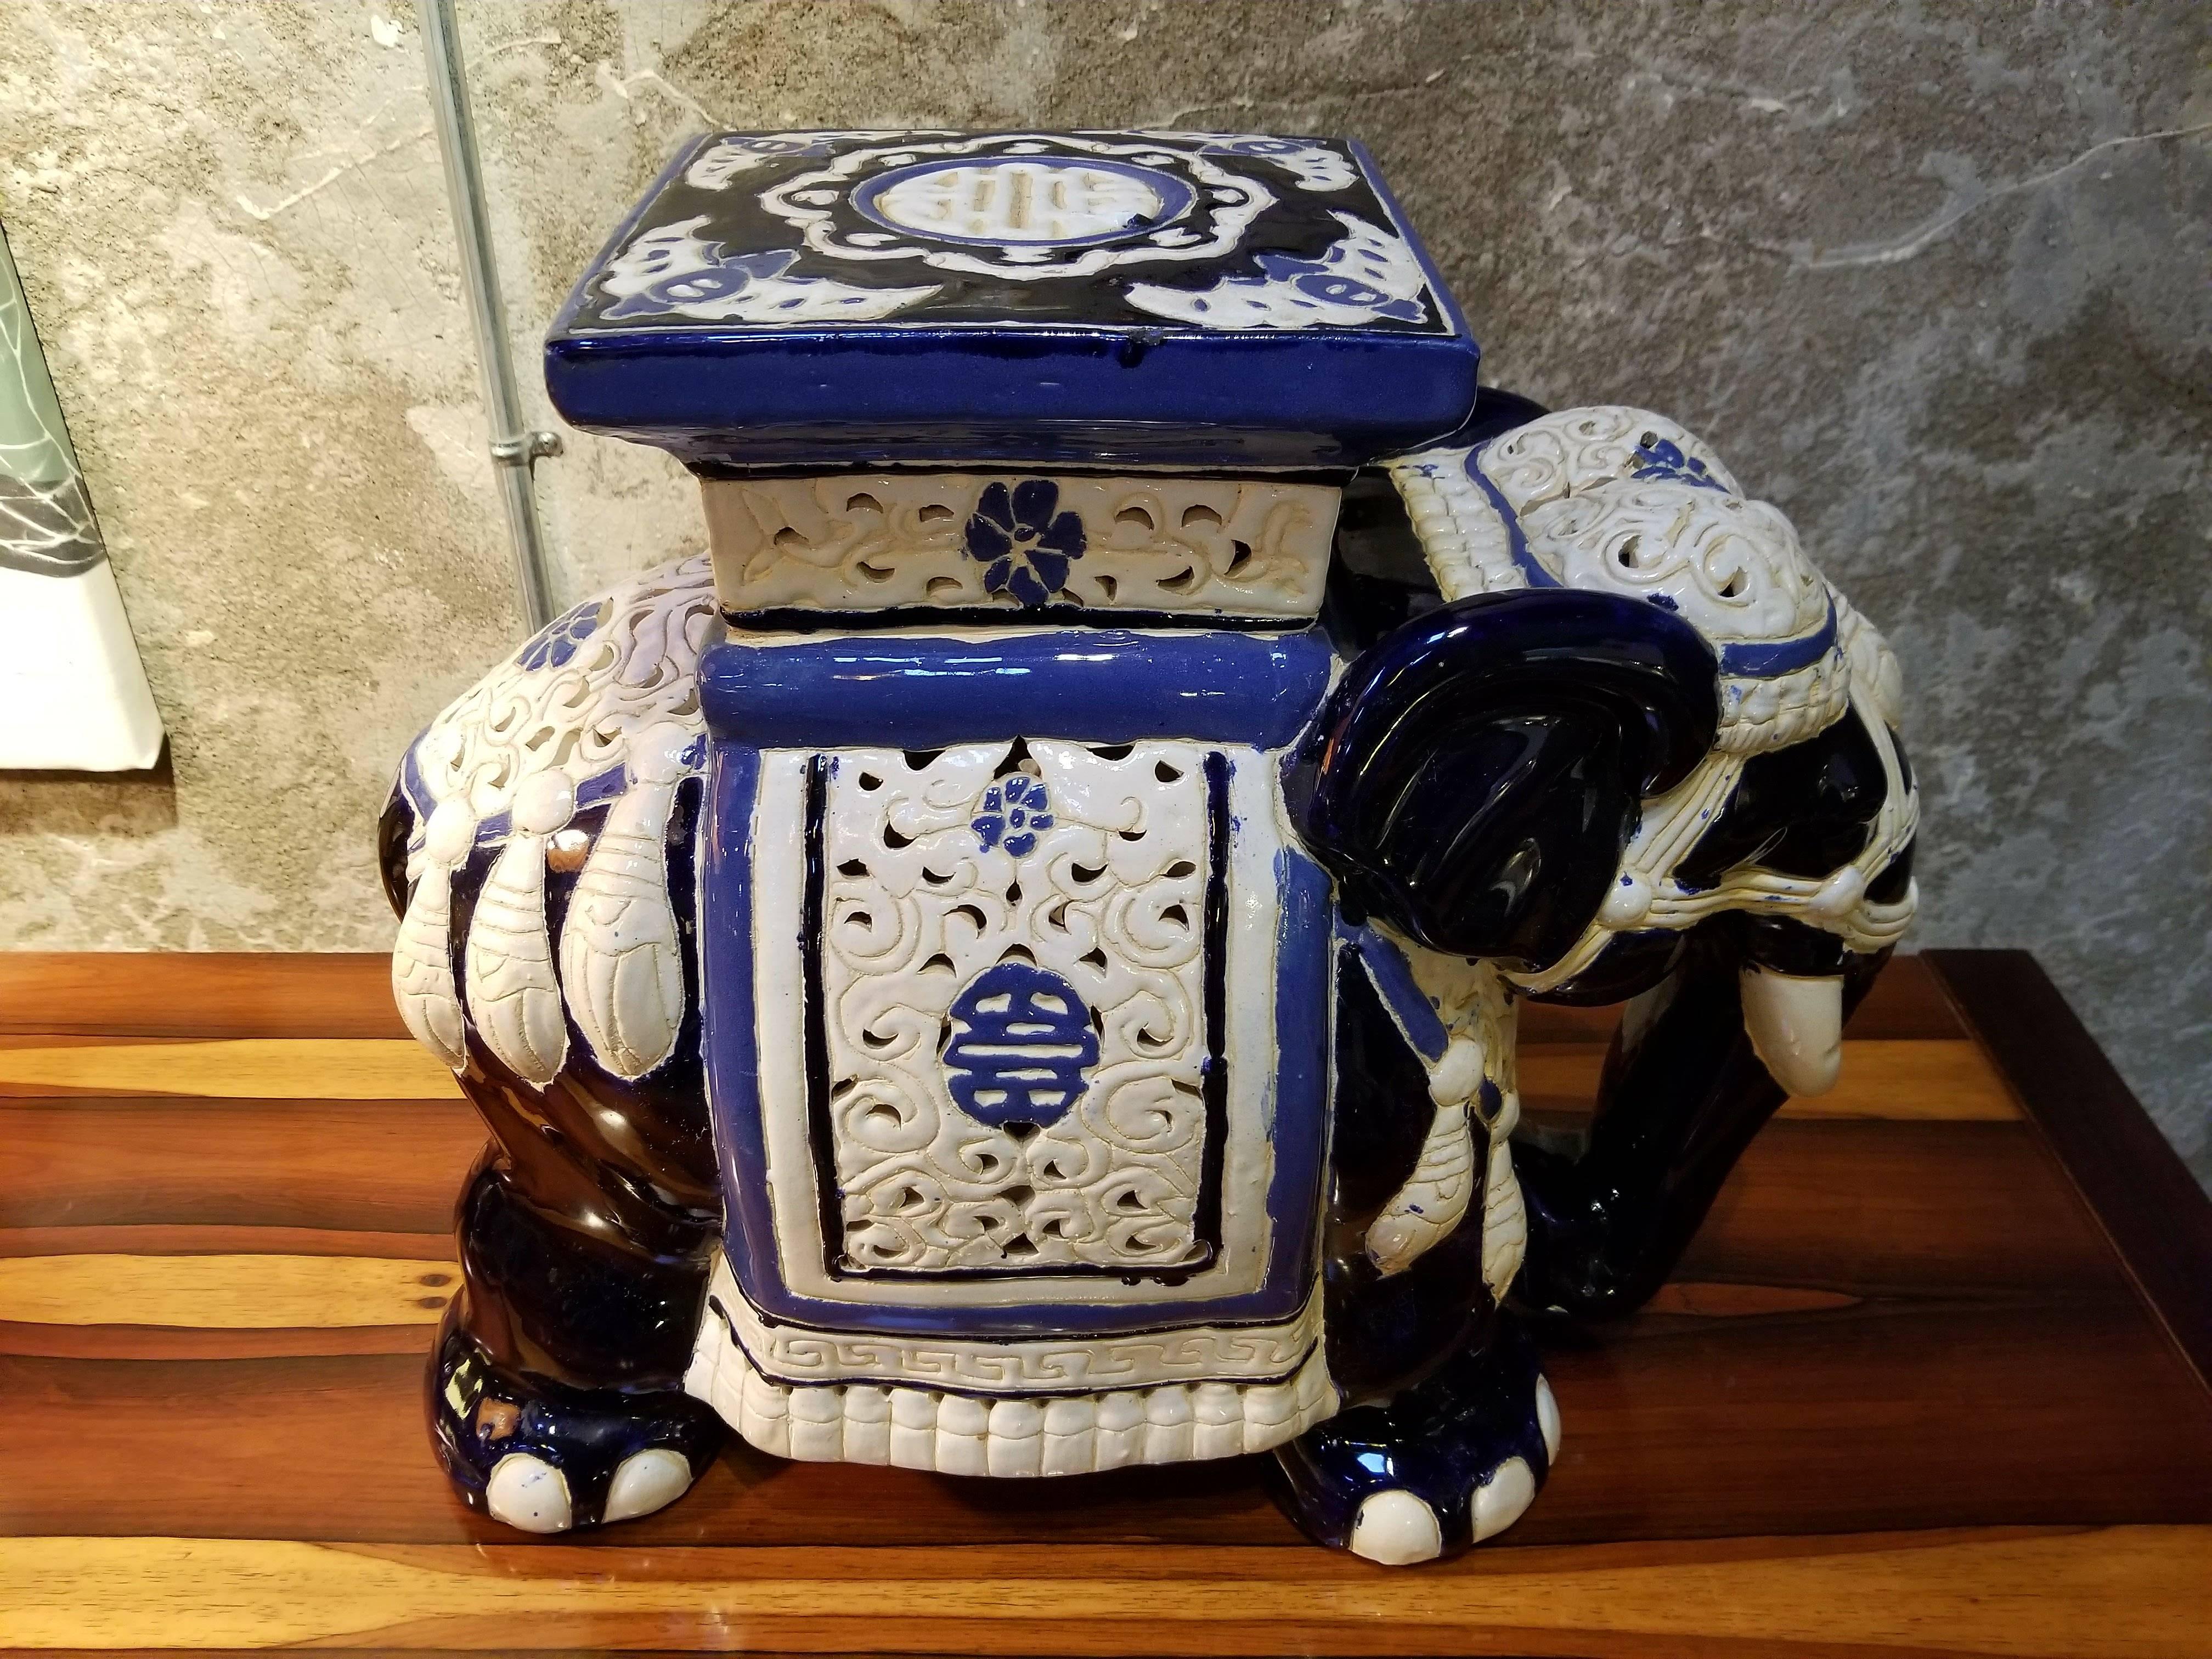 A vintage hand painted ceramic garden stool with cobalt blue, blue and off-white glaze. Excellent condition.